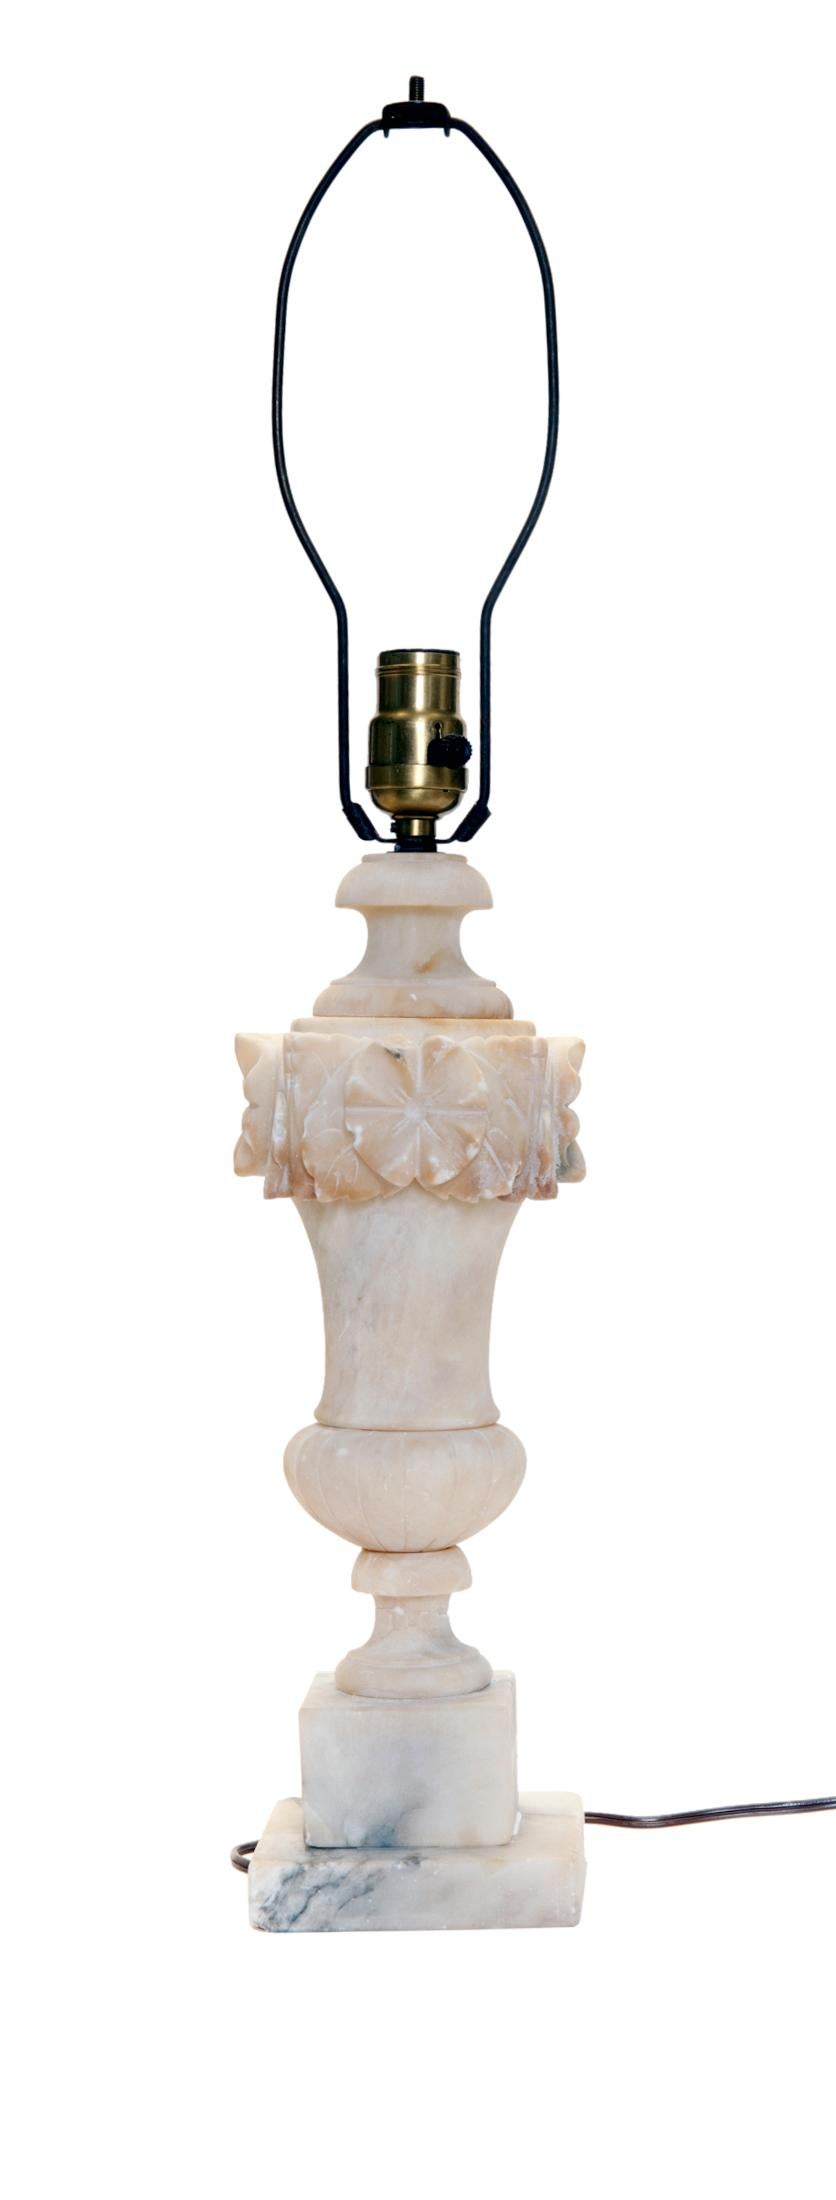 Neoclassical Revival Early 20th Century Alabaster Lamp with Linen Shade